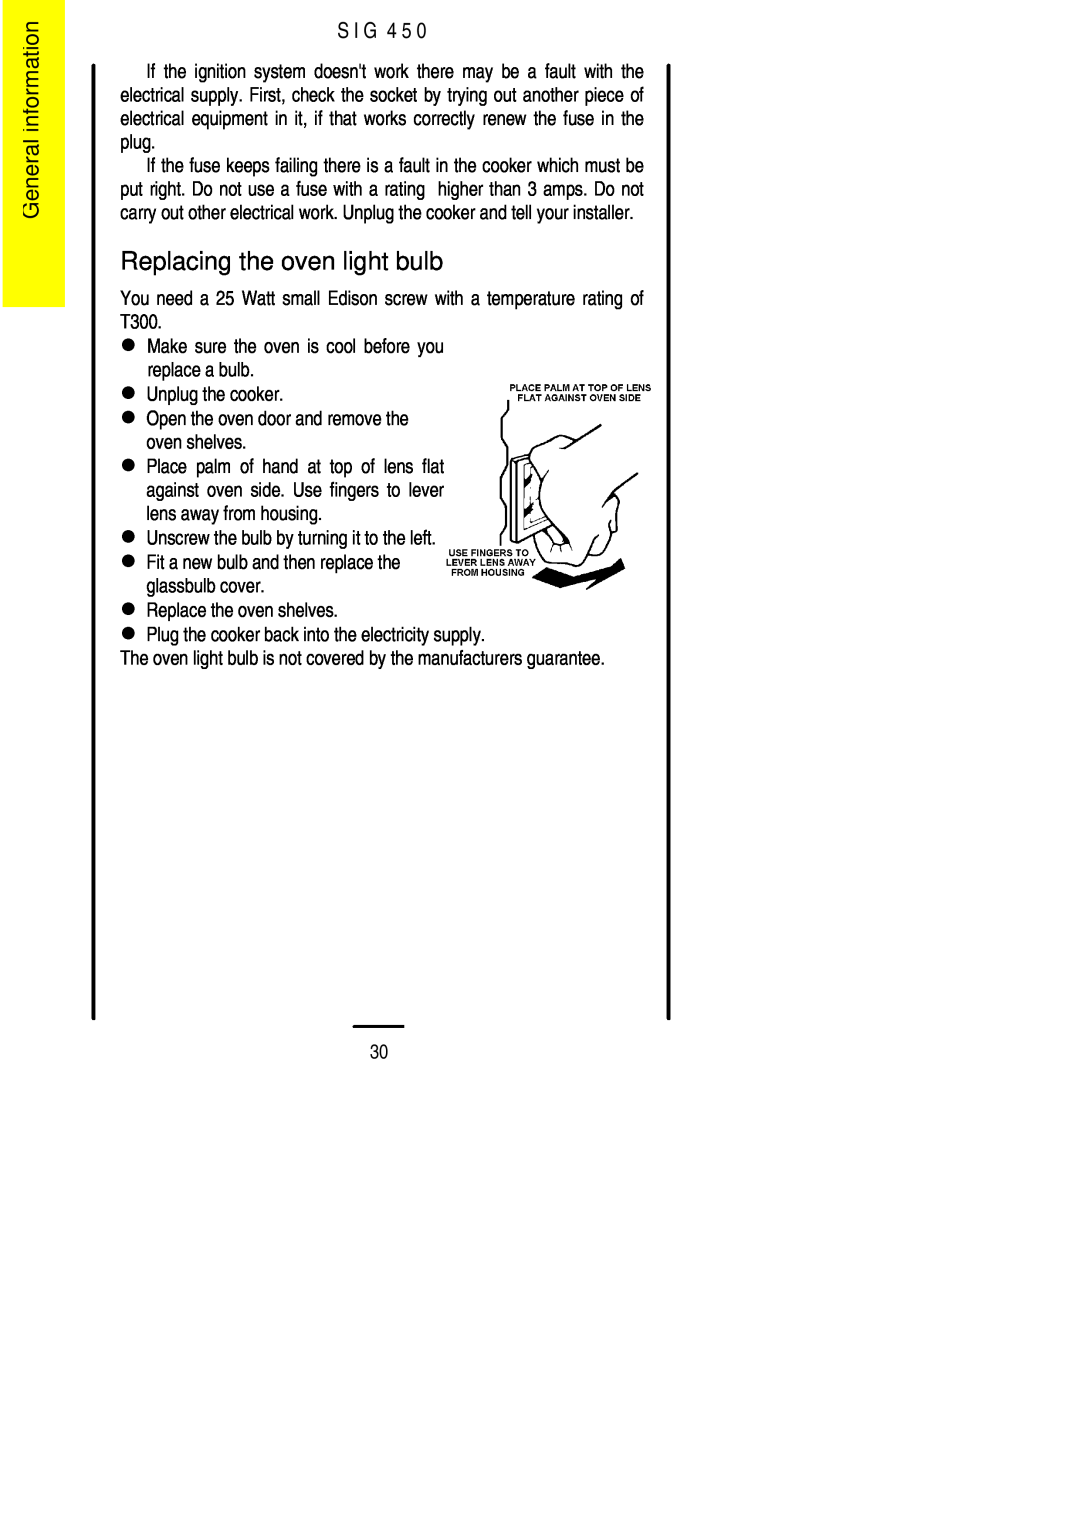 Electrolux SIG 450 installation instructions Replacing the oven light bulb, General information, S I G 4 5 